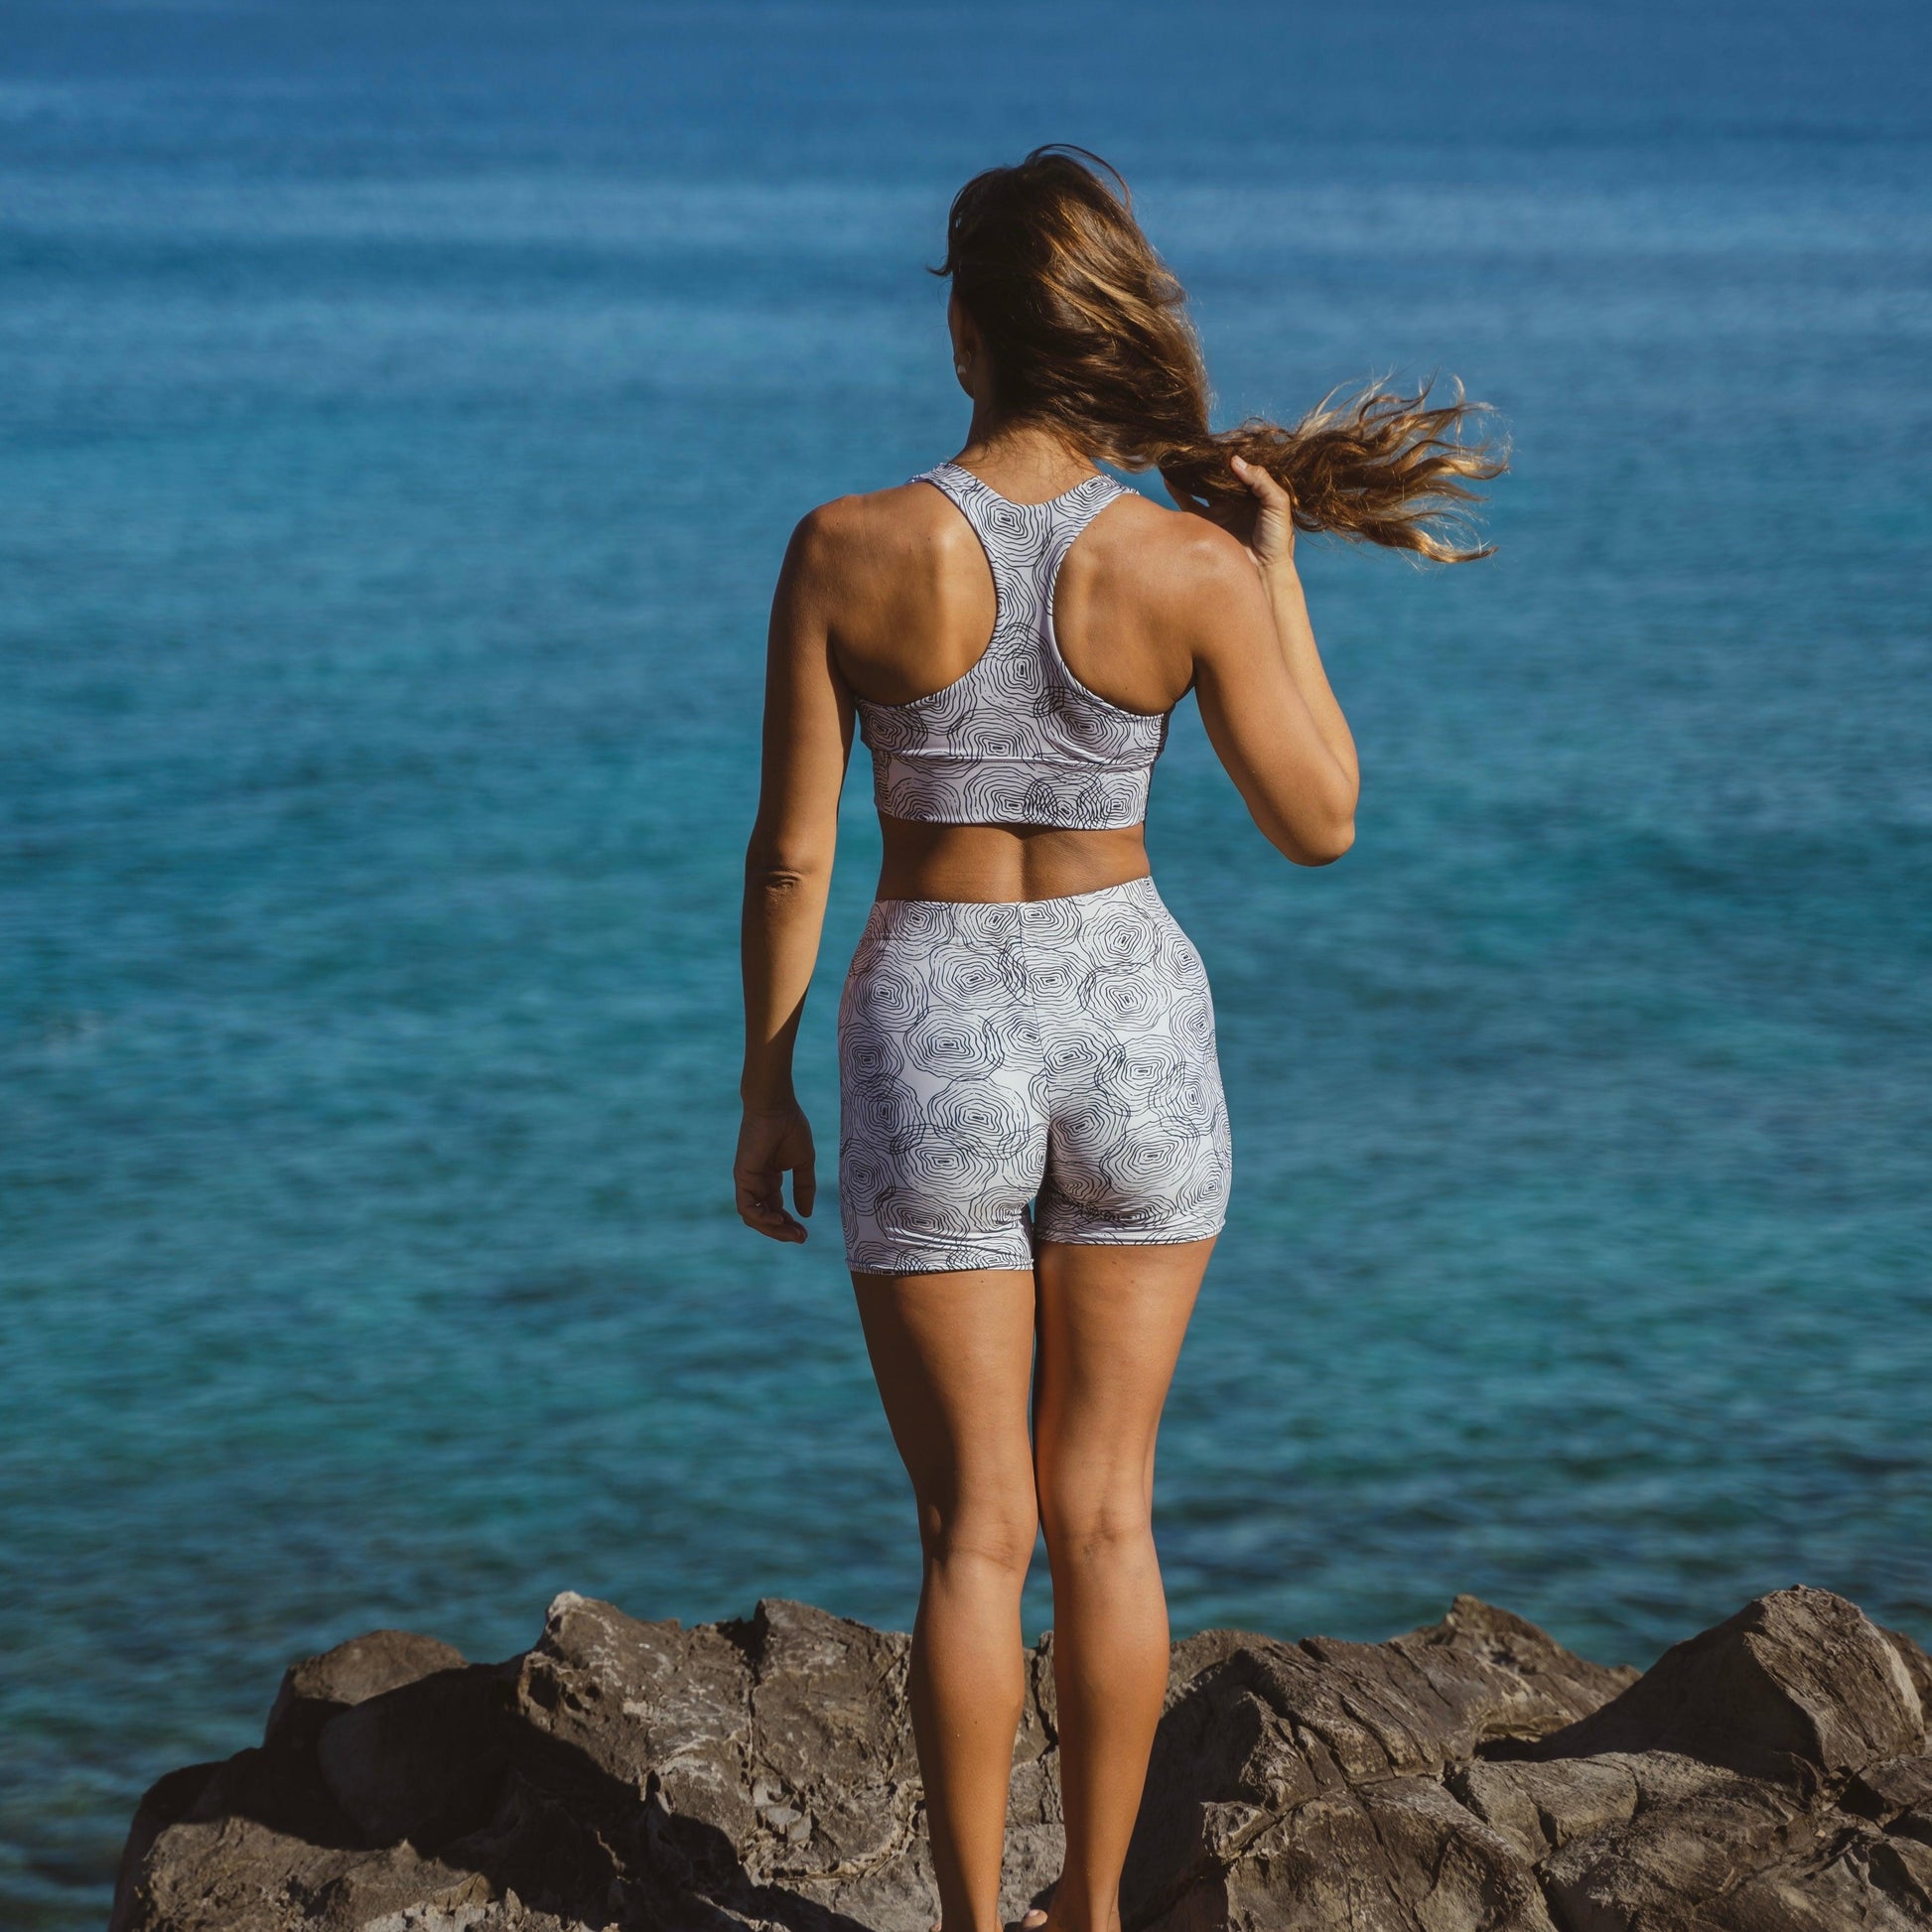 Ripple in Gray All Day Shorts - Solshine and Co